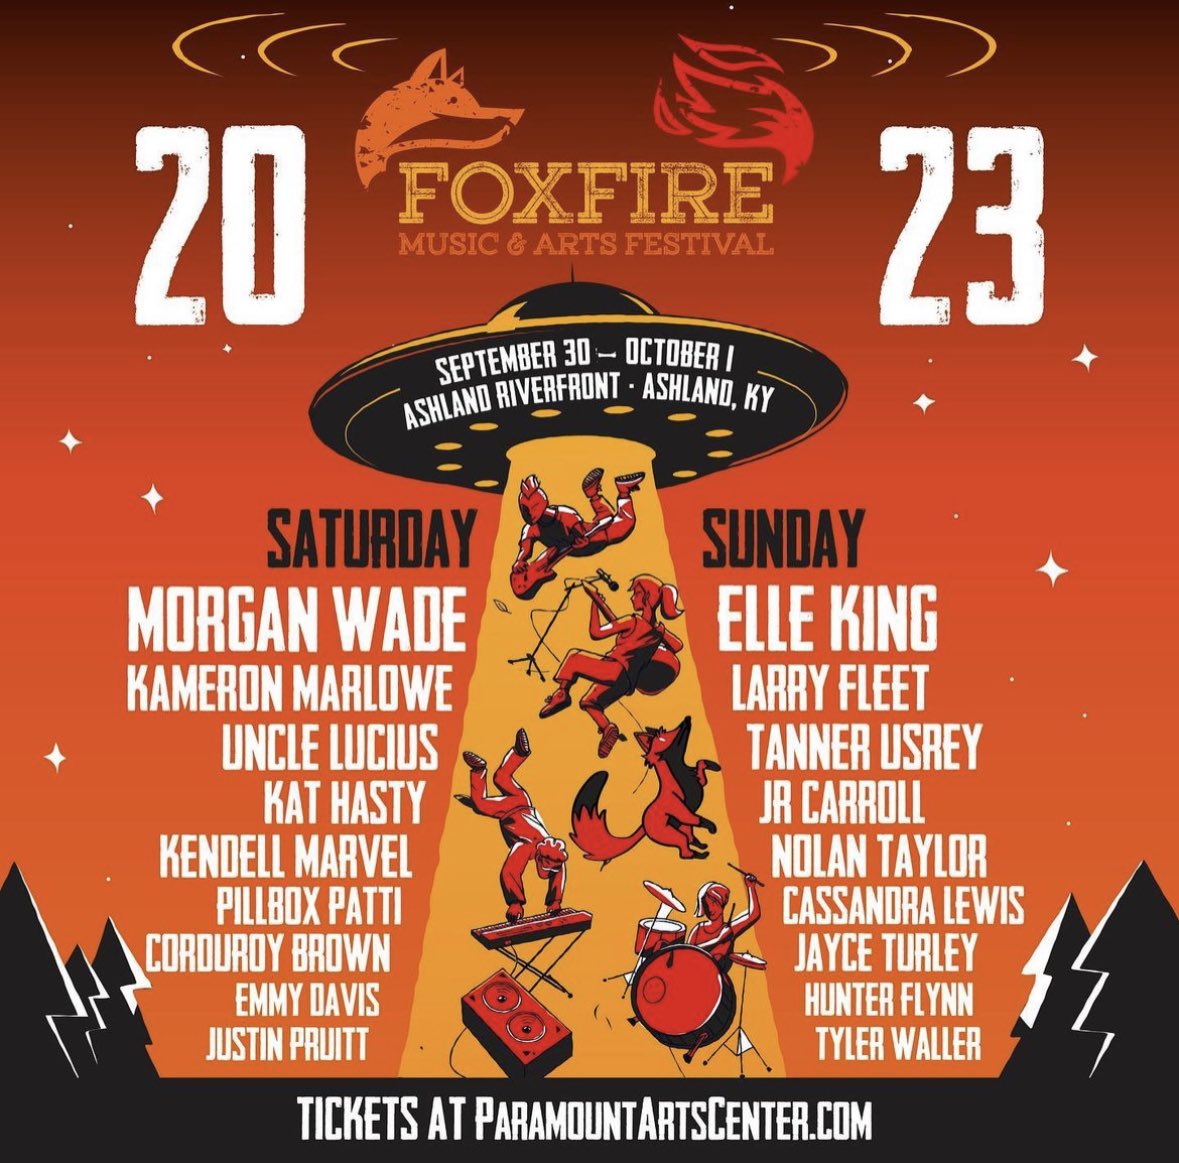 Headin’ up to Ashland, KY this Saturday for Foxfire Fest! Gonna be a damn good day & night of music. We hit the stage at 4:30pm. Will see y’all there 🤠